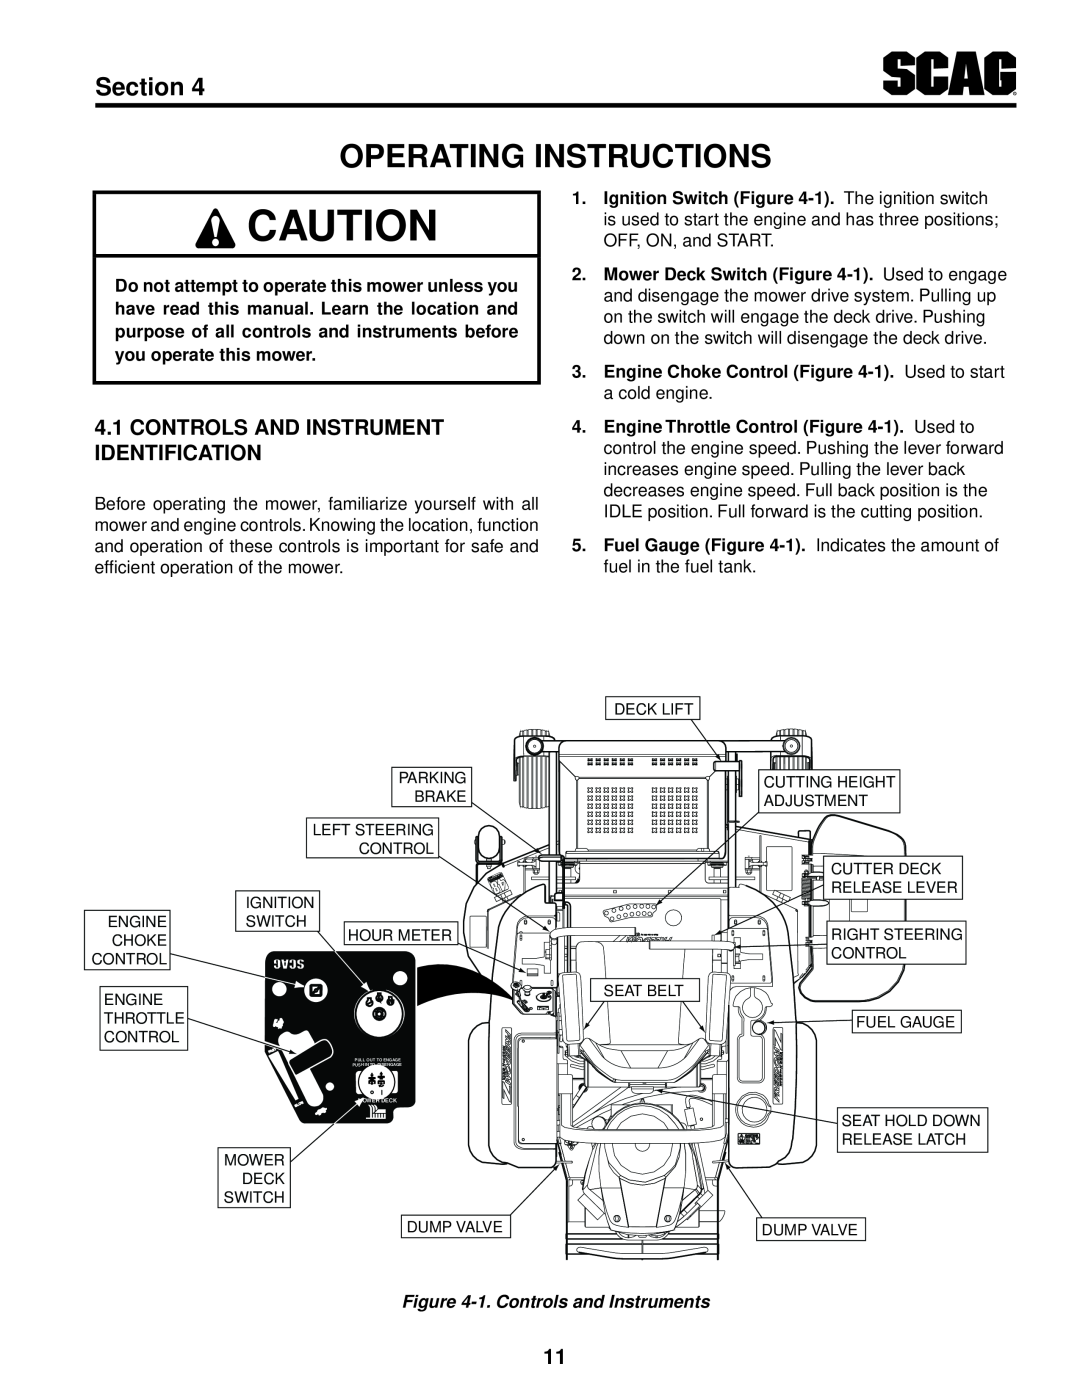 Scag Power Equipment SFZ36-20BS, SFZ61-28BS Operating Instructions, Controls And Instrument, Identification, Section 